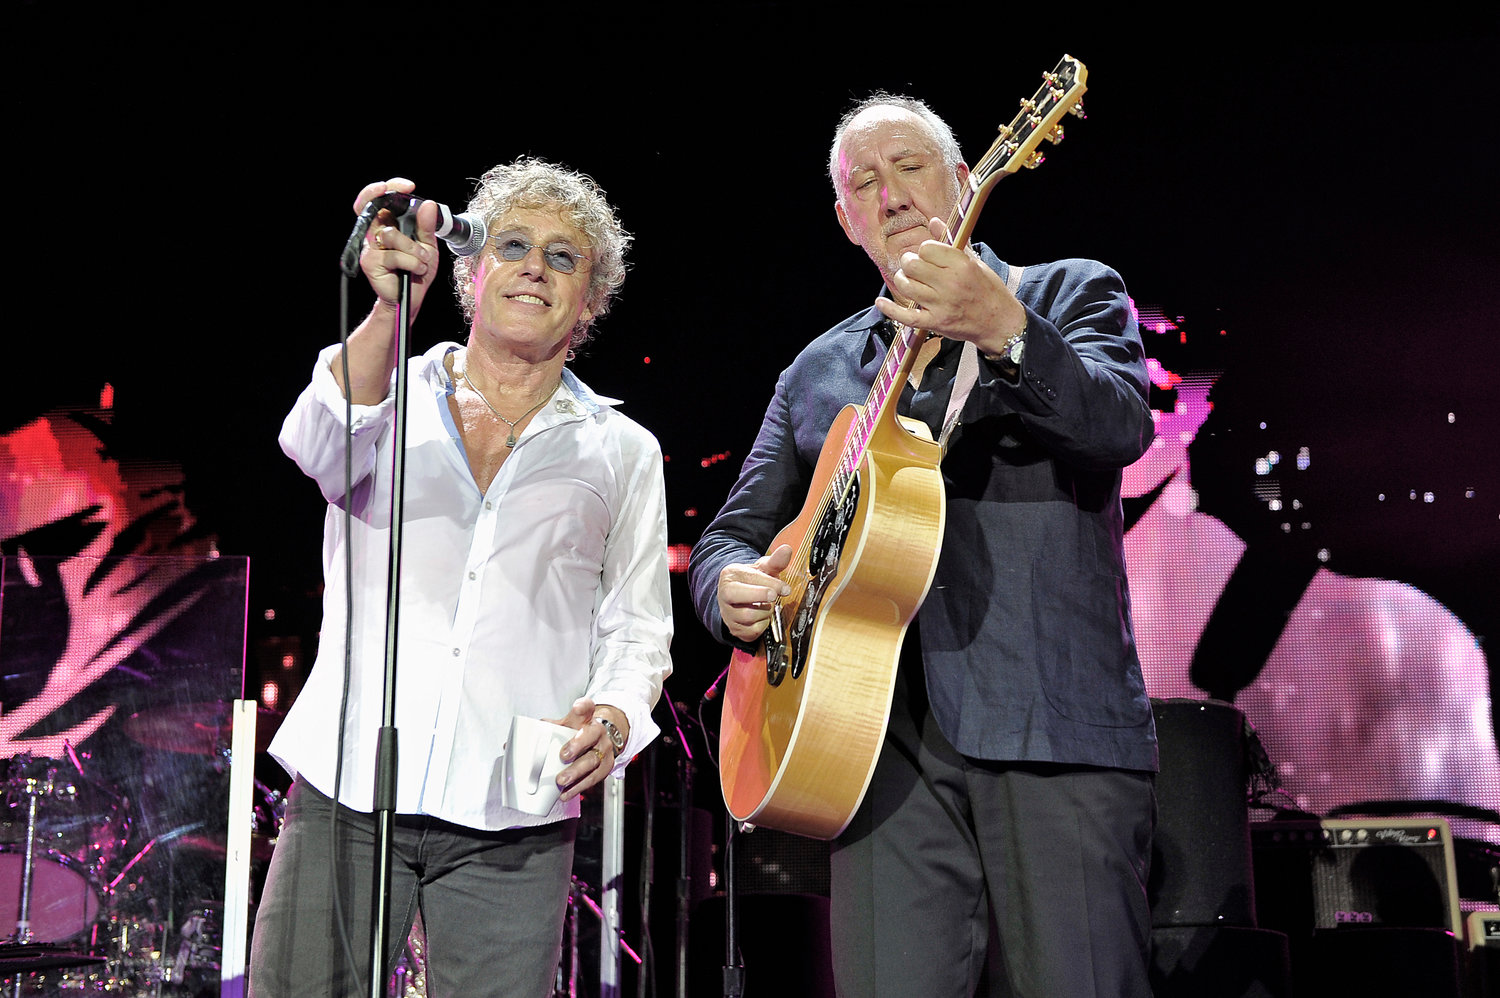 Roger Daltrey and Pete Townshend.